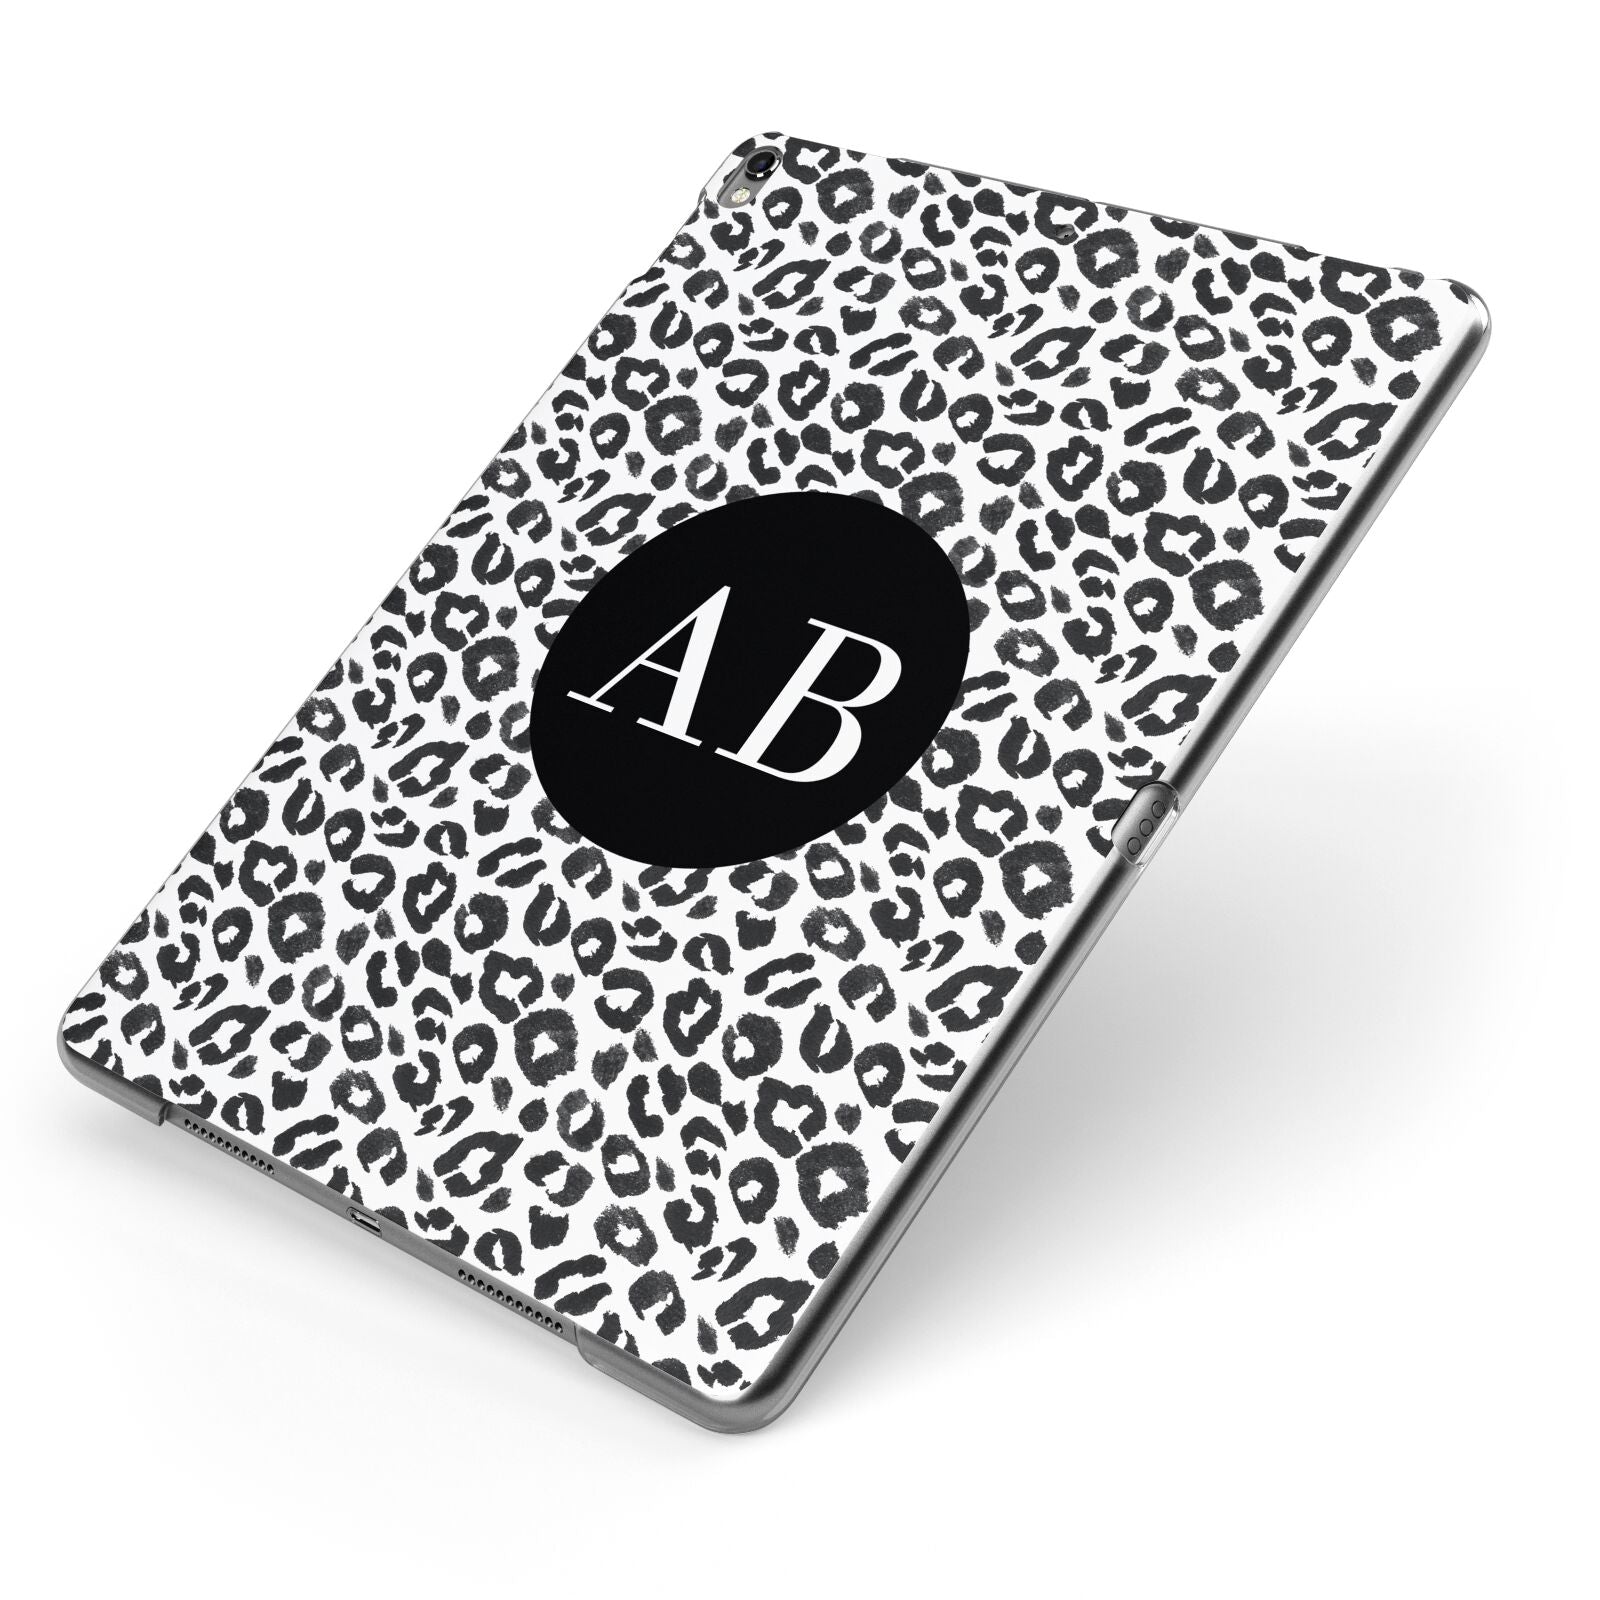 Leopard Print Black and White Apple iPad Case on Grey iPad Side View